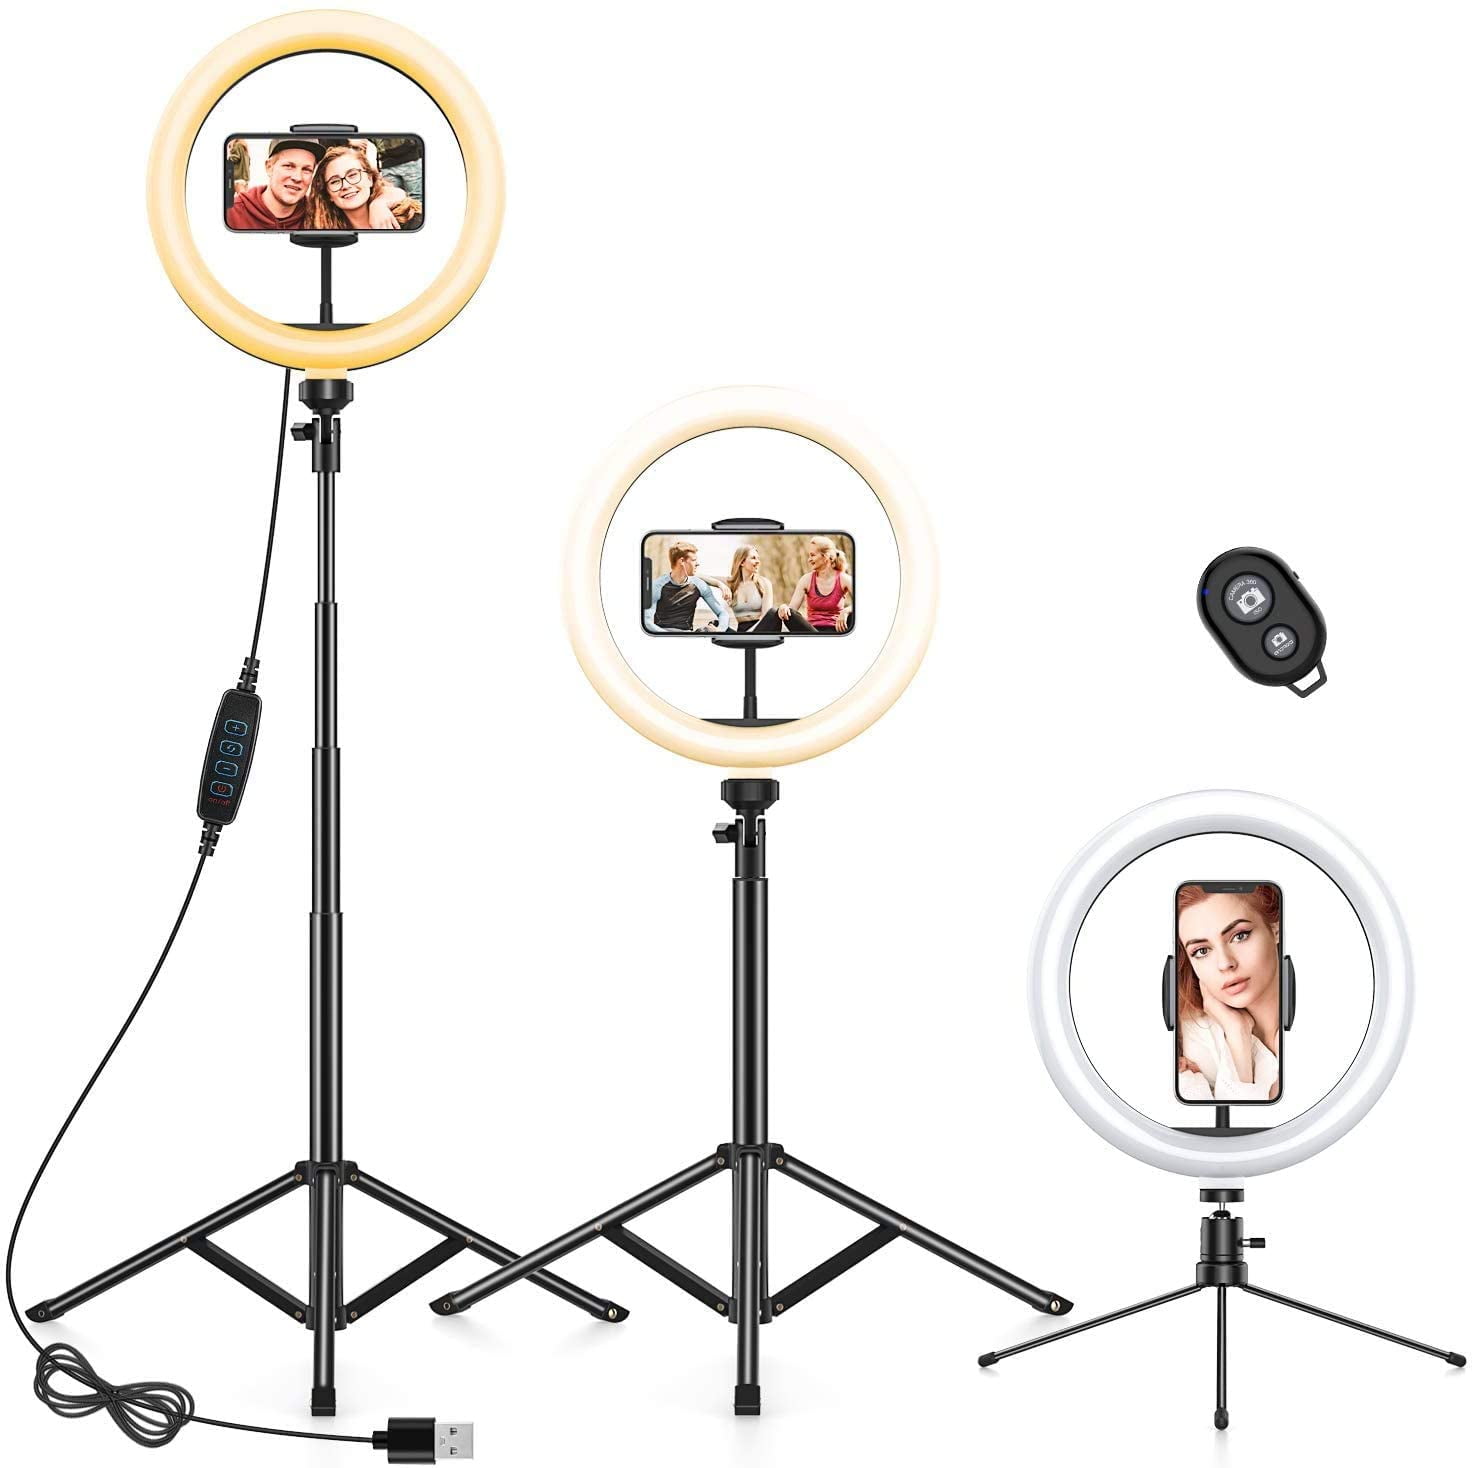 MEETTOP 12 Touch & Remote Selfie Ring Light with Tripod Stands and 2 Phone Holders Dimmable LED Ring Light with Bluetooth Remote and Lamp Remote Controller for YouTube/Live Stream/Makeup/Photography